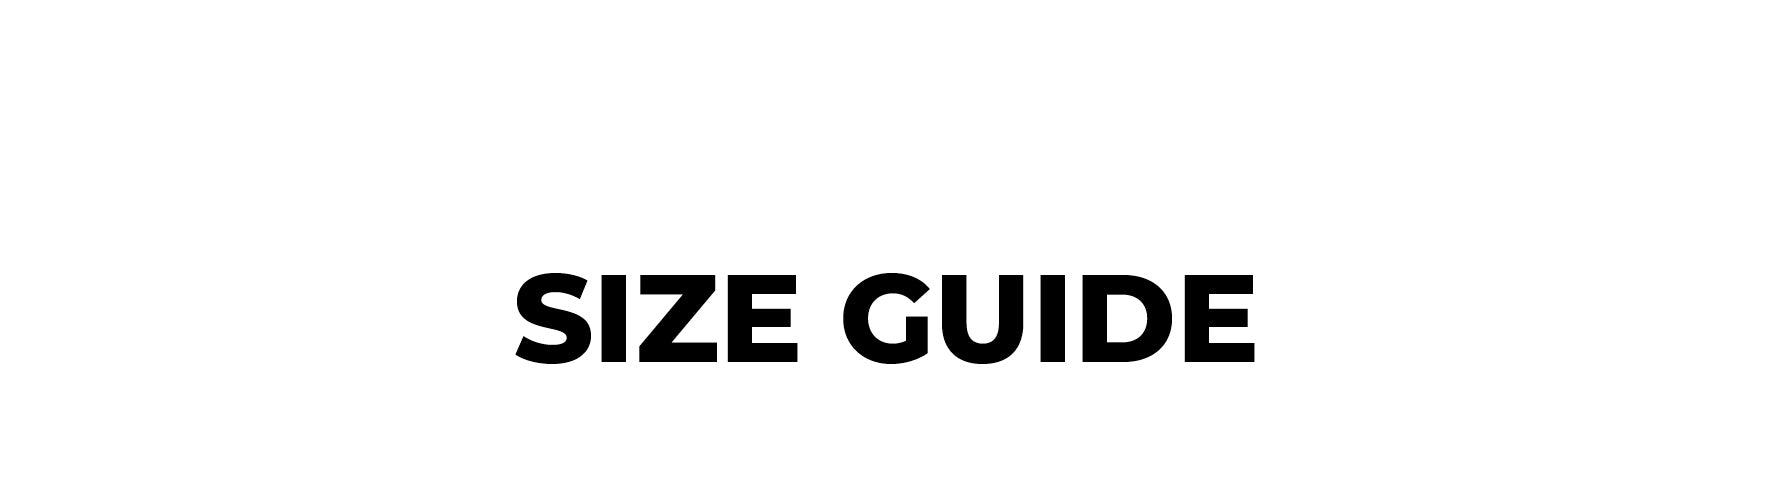 Size Guide – Urban Planet